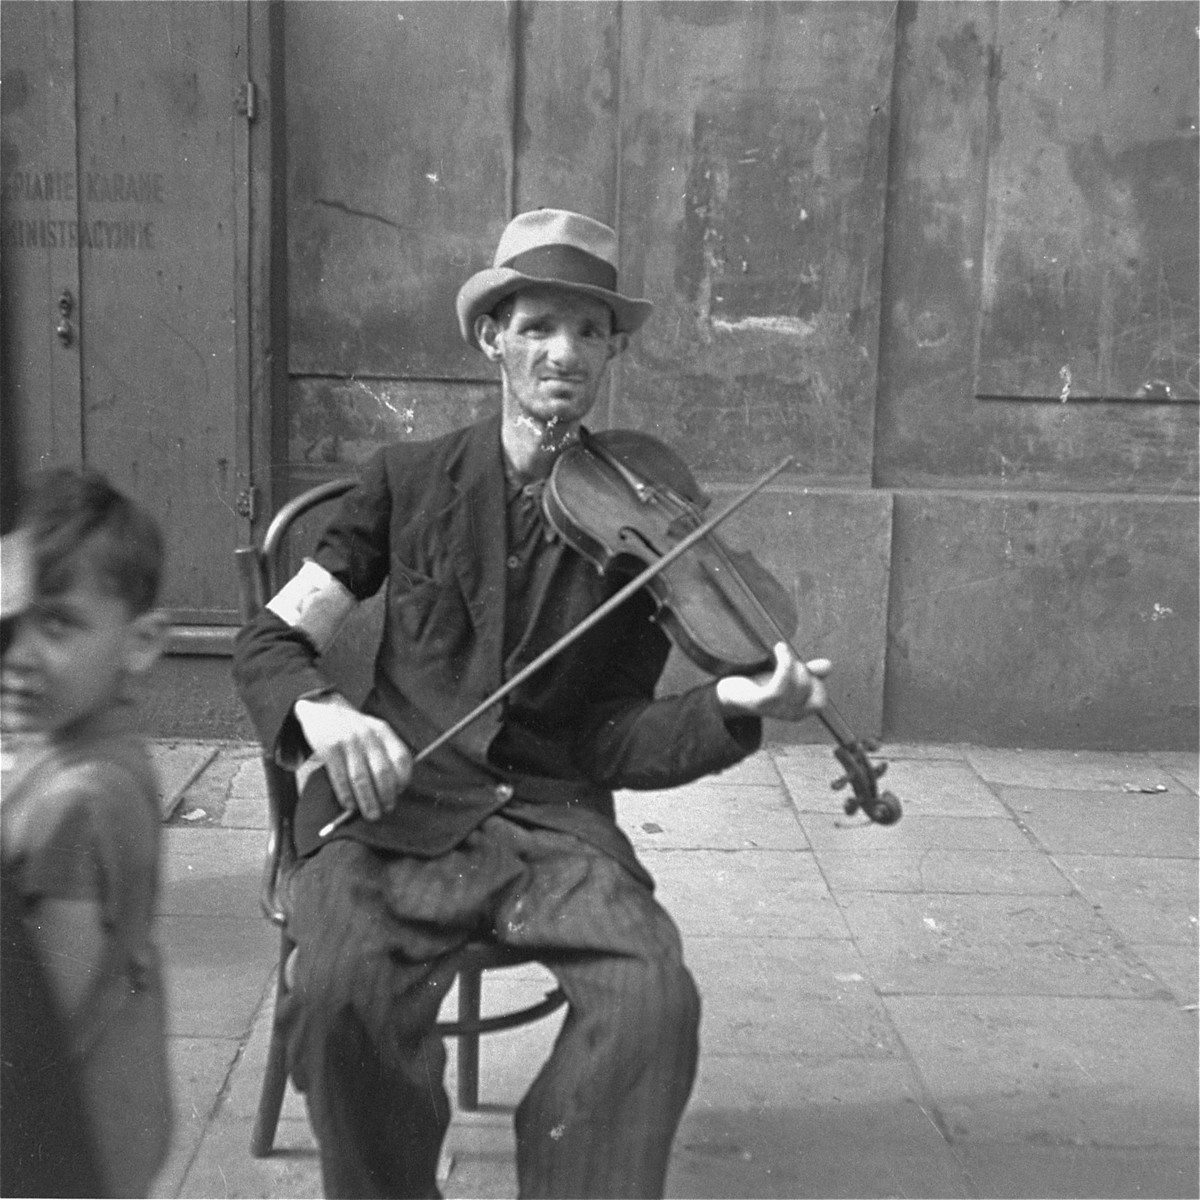 A man on the street plays the violin in the hope of receiving food or money.  

Joest's original caption reads:  "This man played the same sound on his violin again and again.  His eyes followed me, but whether out of fear or because he hoped to receive a coin I do not know."